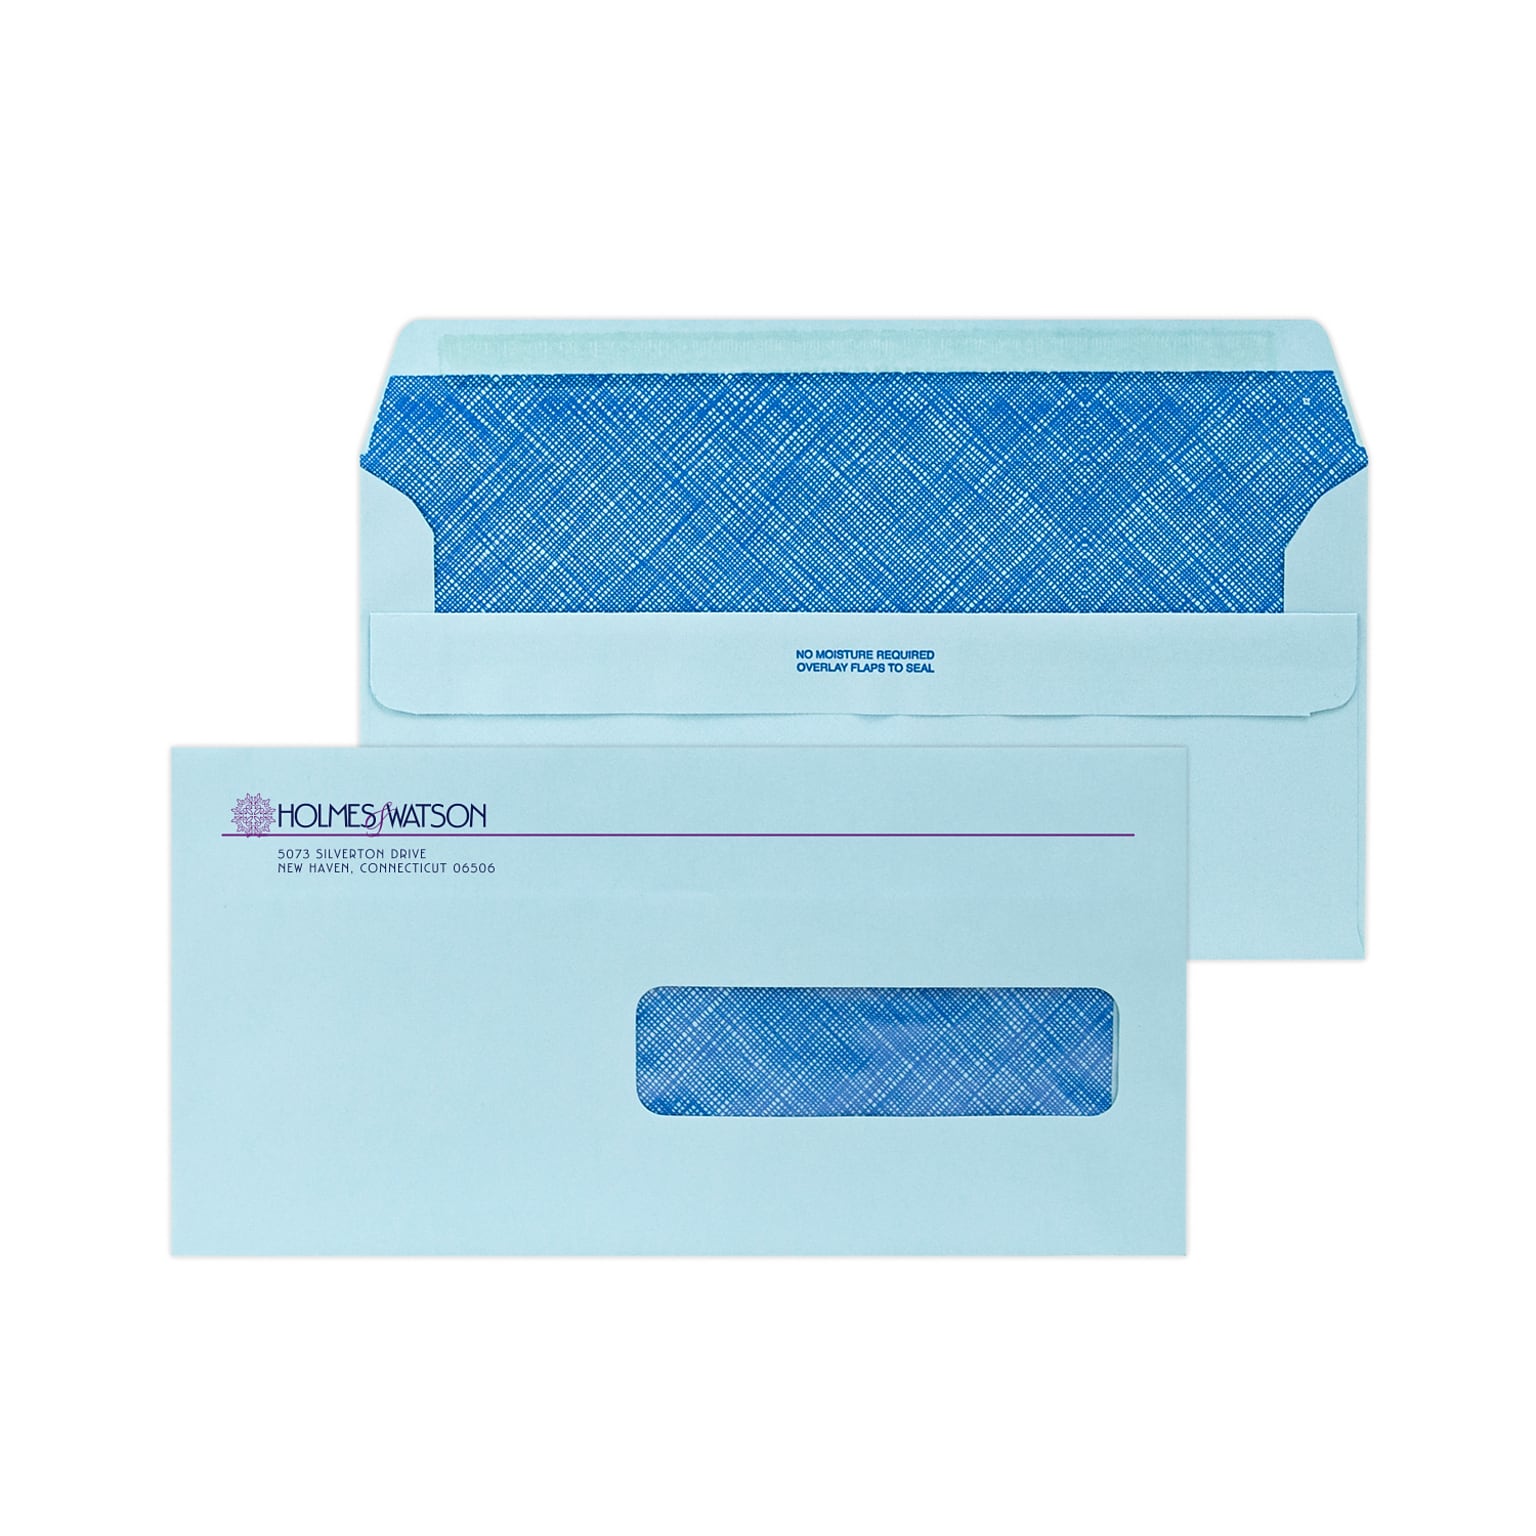 Custom 4-1/2 x 9 Insurance Claim Self Seal Right Window Envelopes with Security Tint, 24# Blue Wove, 2 Custom Inks, 250 / Pack